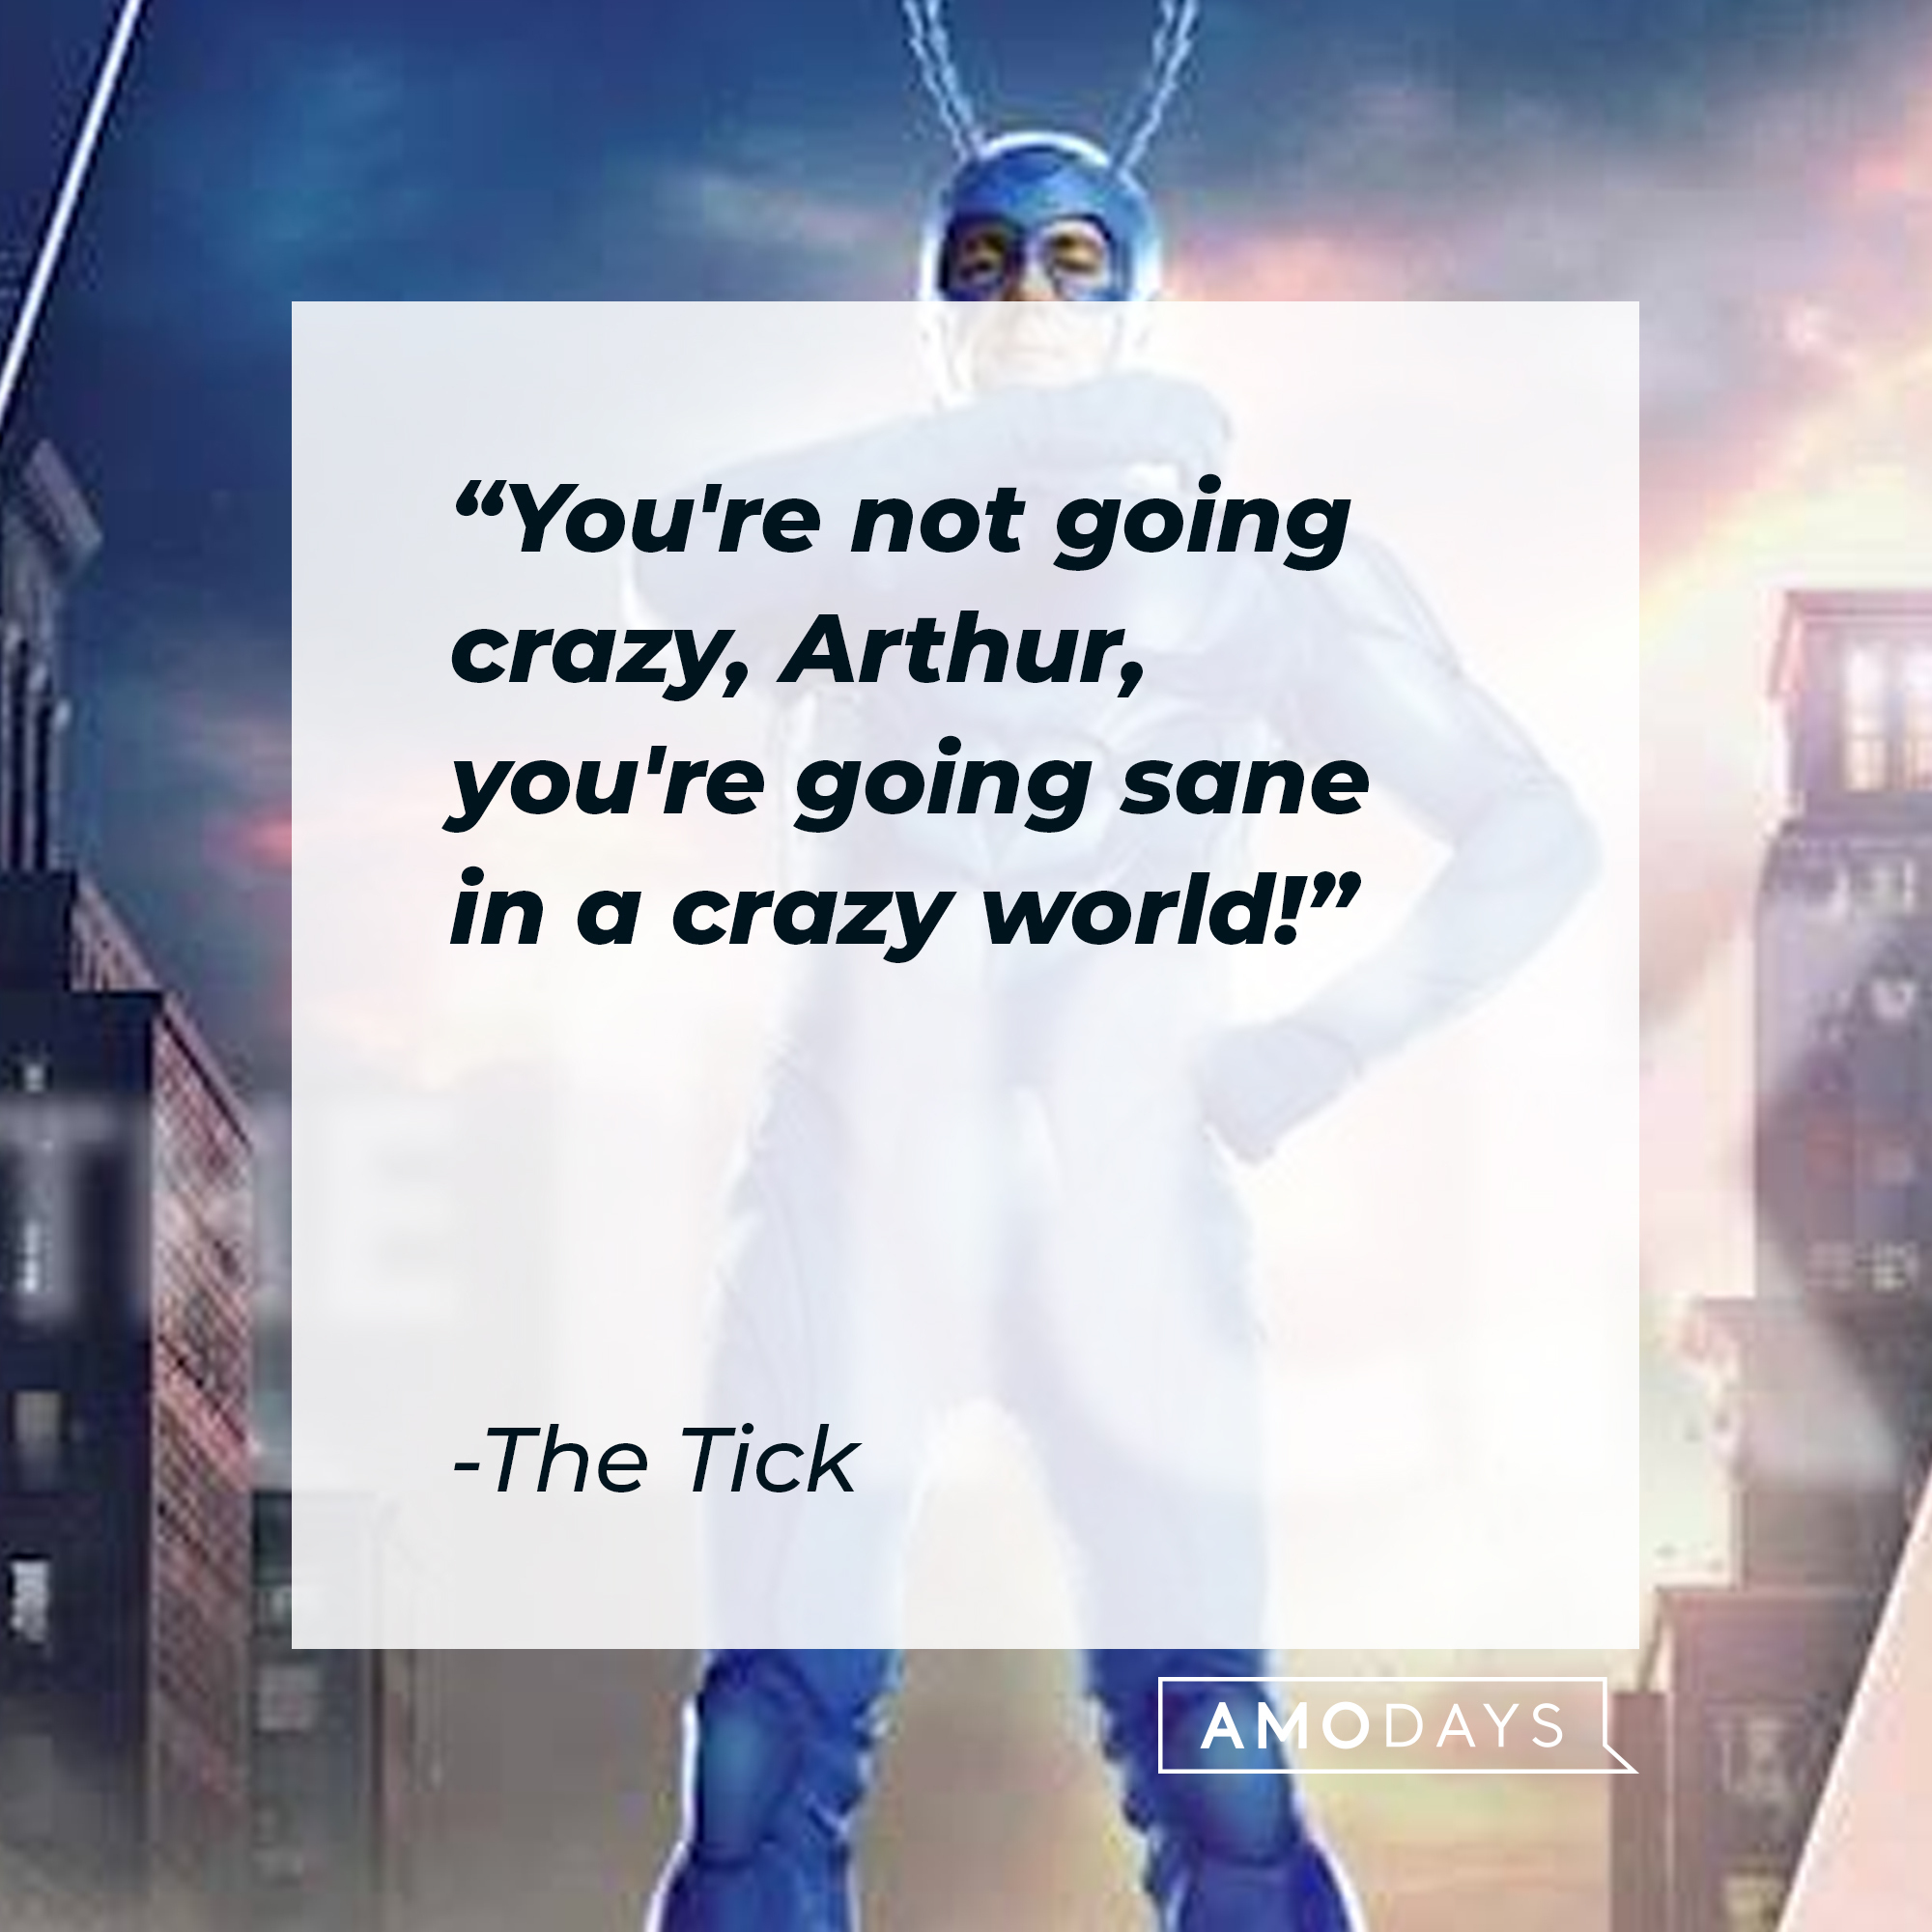 The Tick's quote: "You're not going crazy, Arthur, you're going sane in a crazy world!" | Source: Facebook.com/TheTick